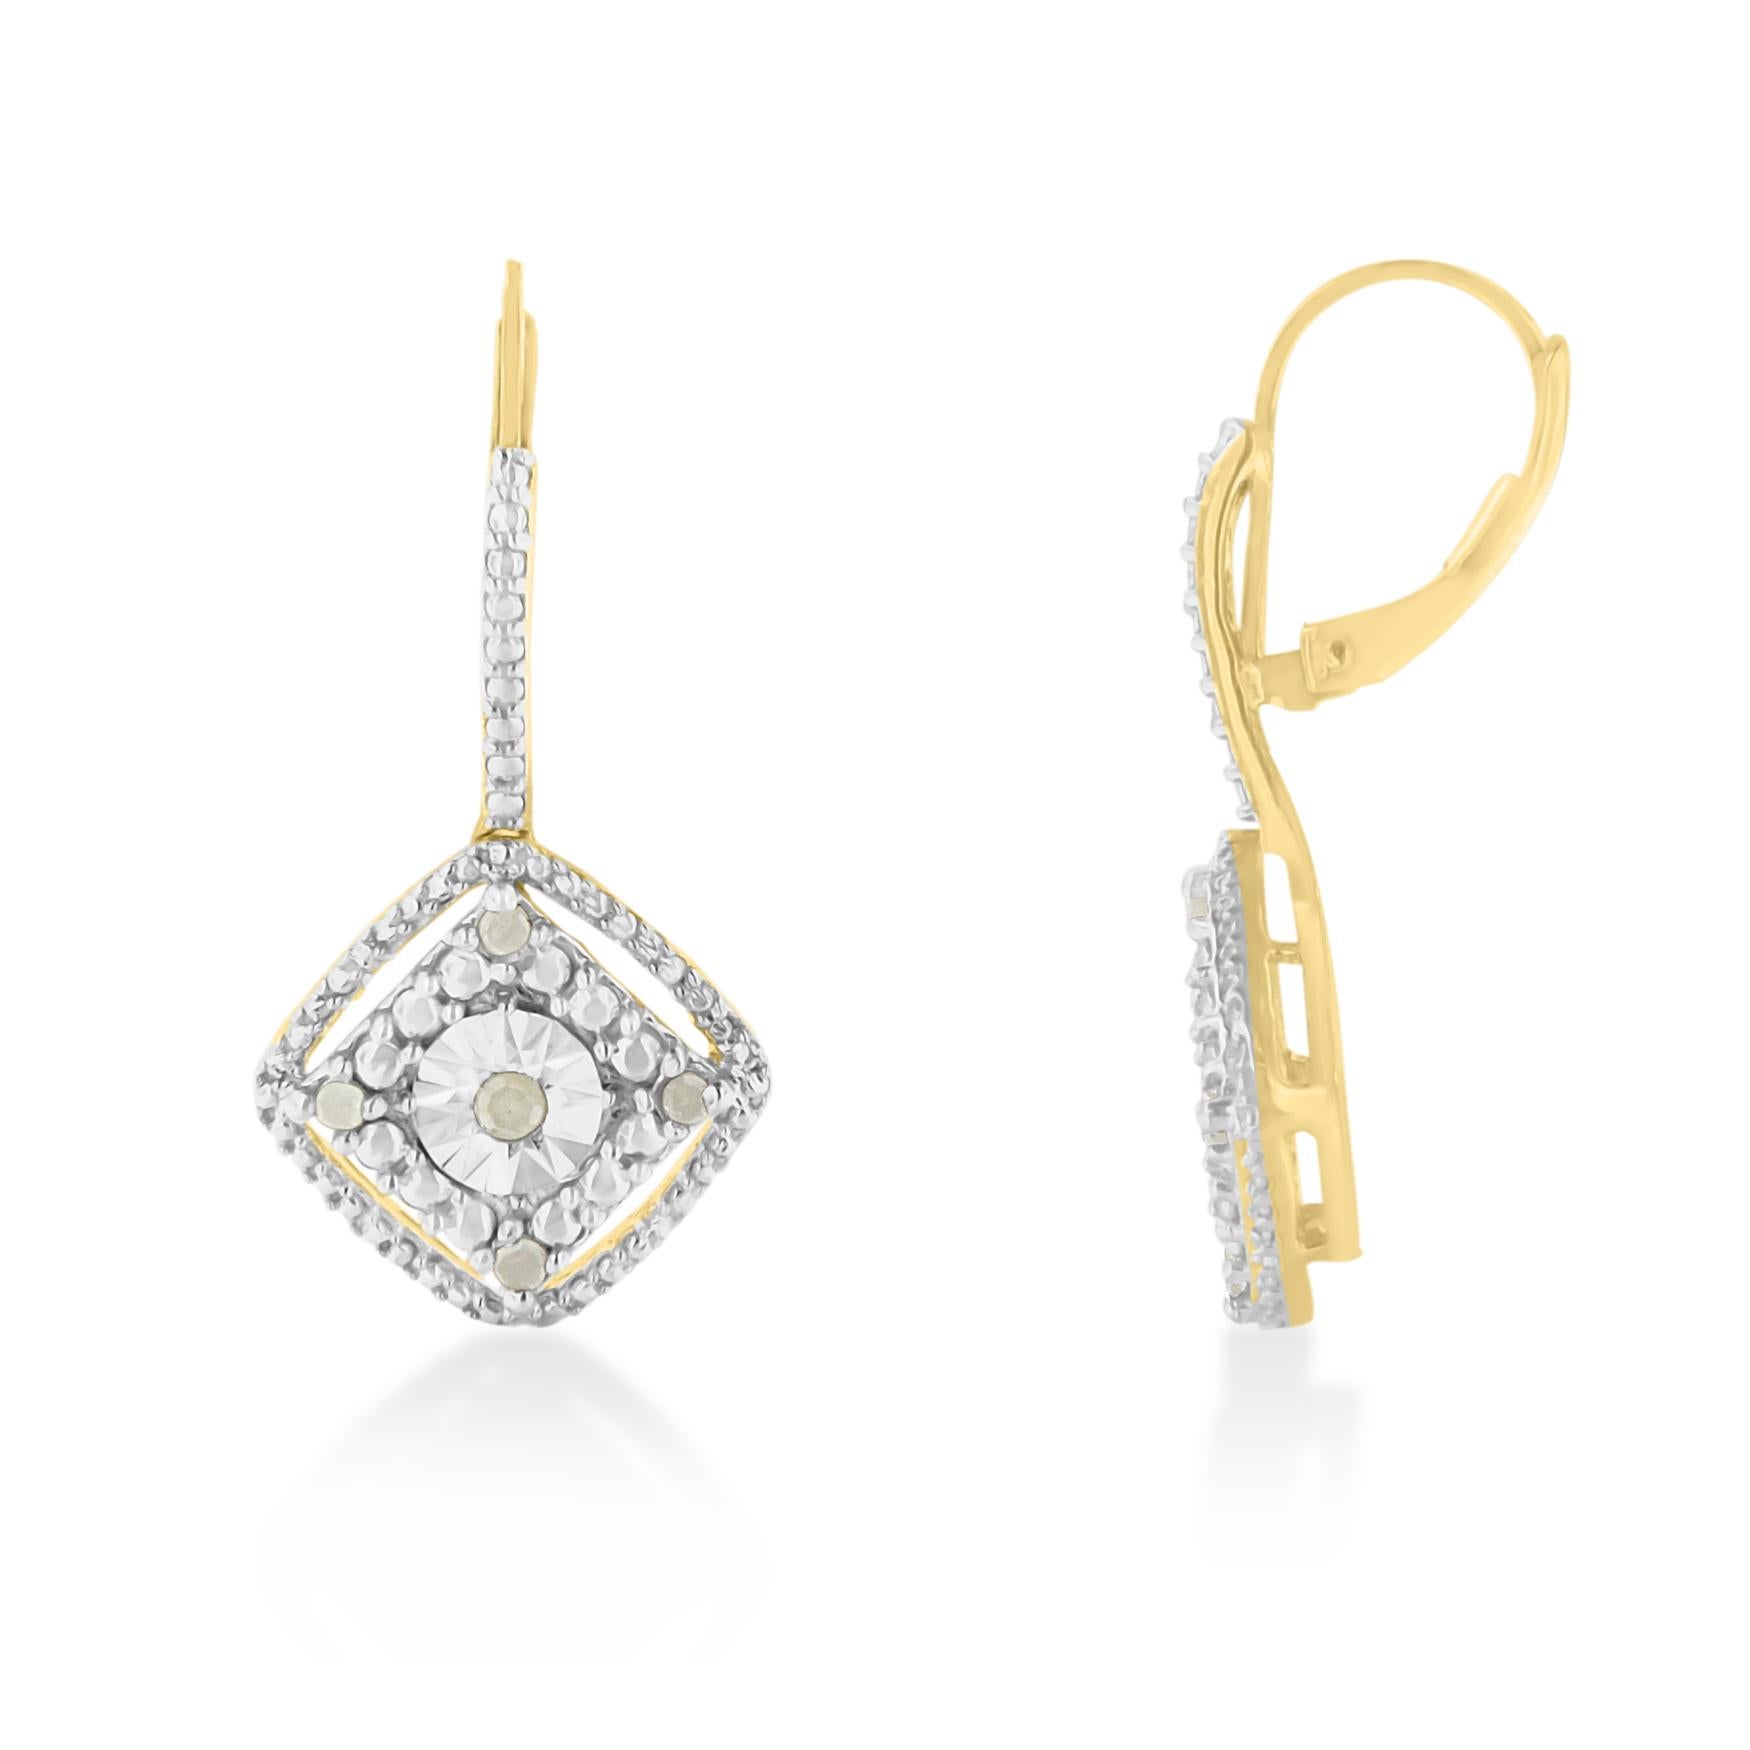 Elevate your style and add a touch of glamour to any occasion with these exquisite Yellow Gold Plated Sterling Silver Diamond Dangle Earrings. Perfectly encapsulating the luxurious essence of the Art Deco era, these earrings boast a quarter carat of